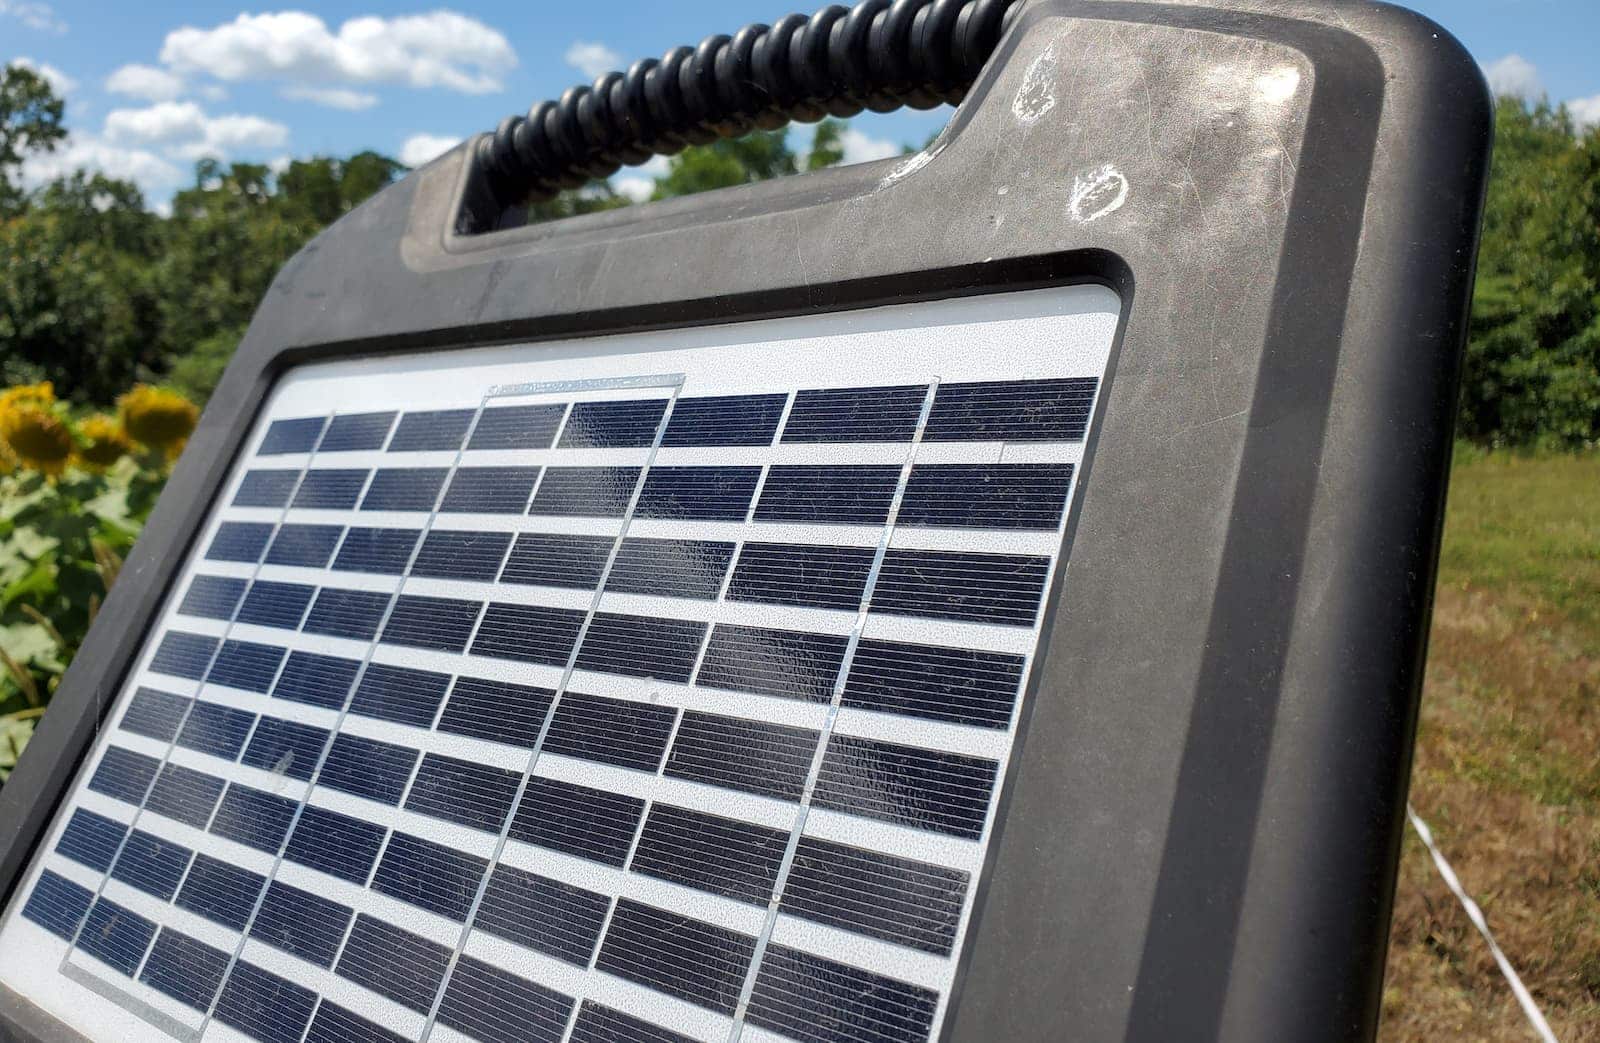 Review: Solar Panel Charger - The Best Portable Charging Solution